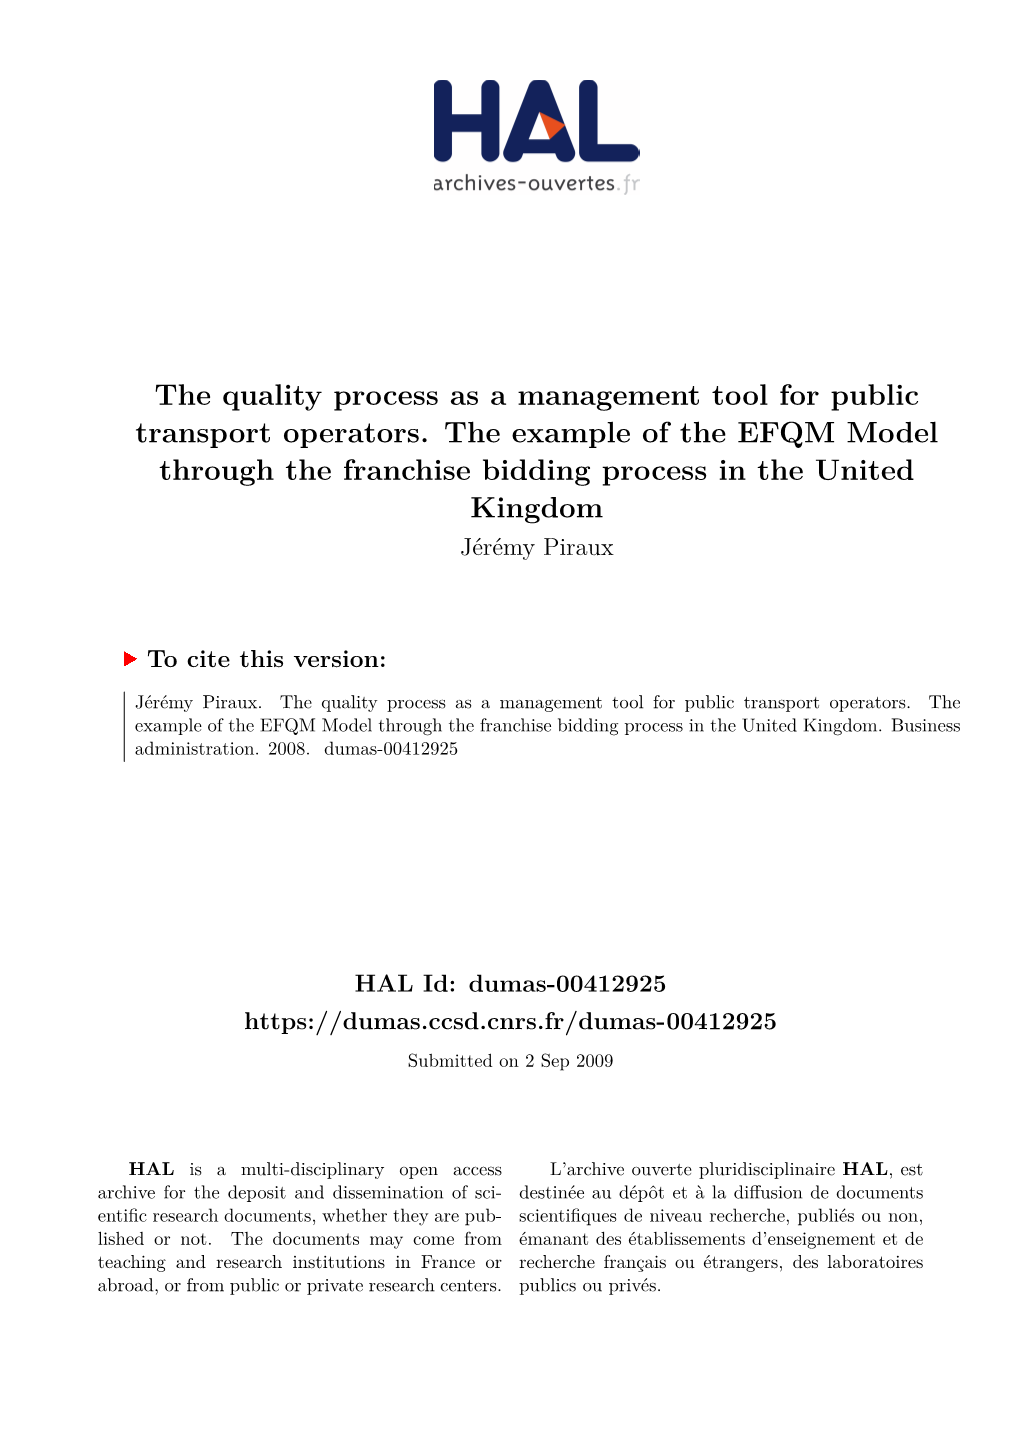 The Quality Process As a Management Tool for Public Transport Operators